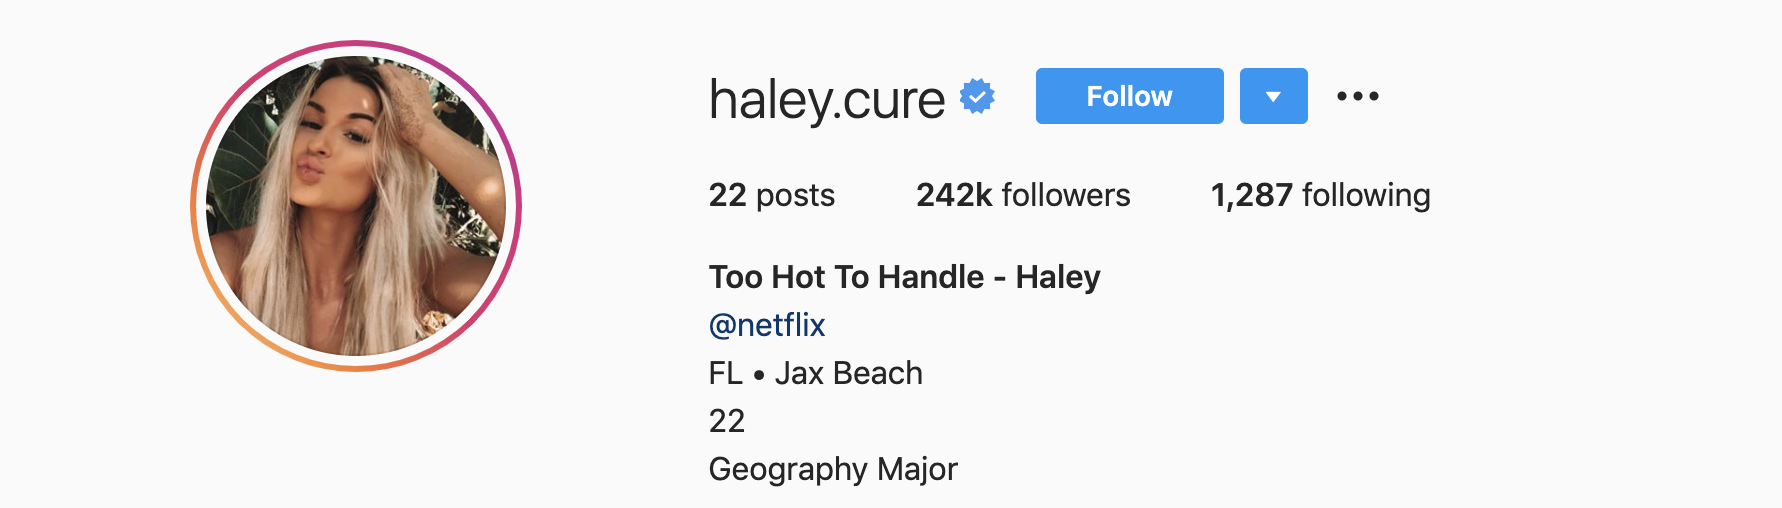 Haley cure onlyfans